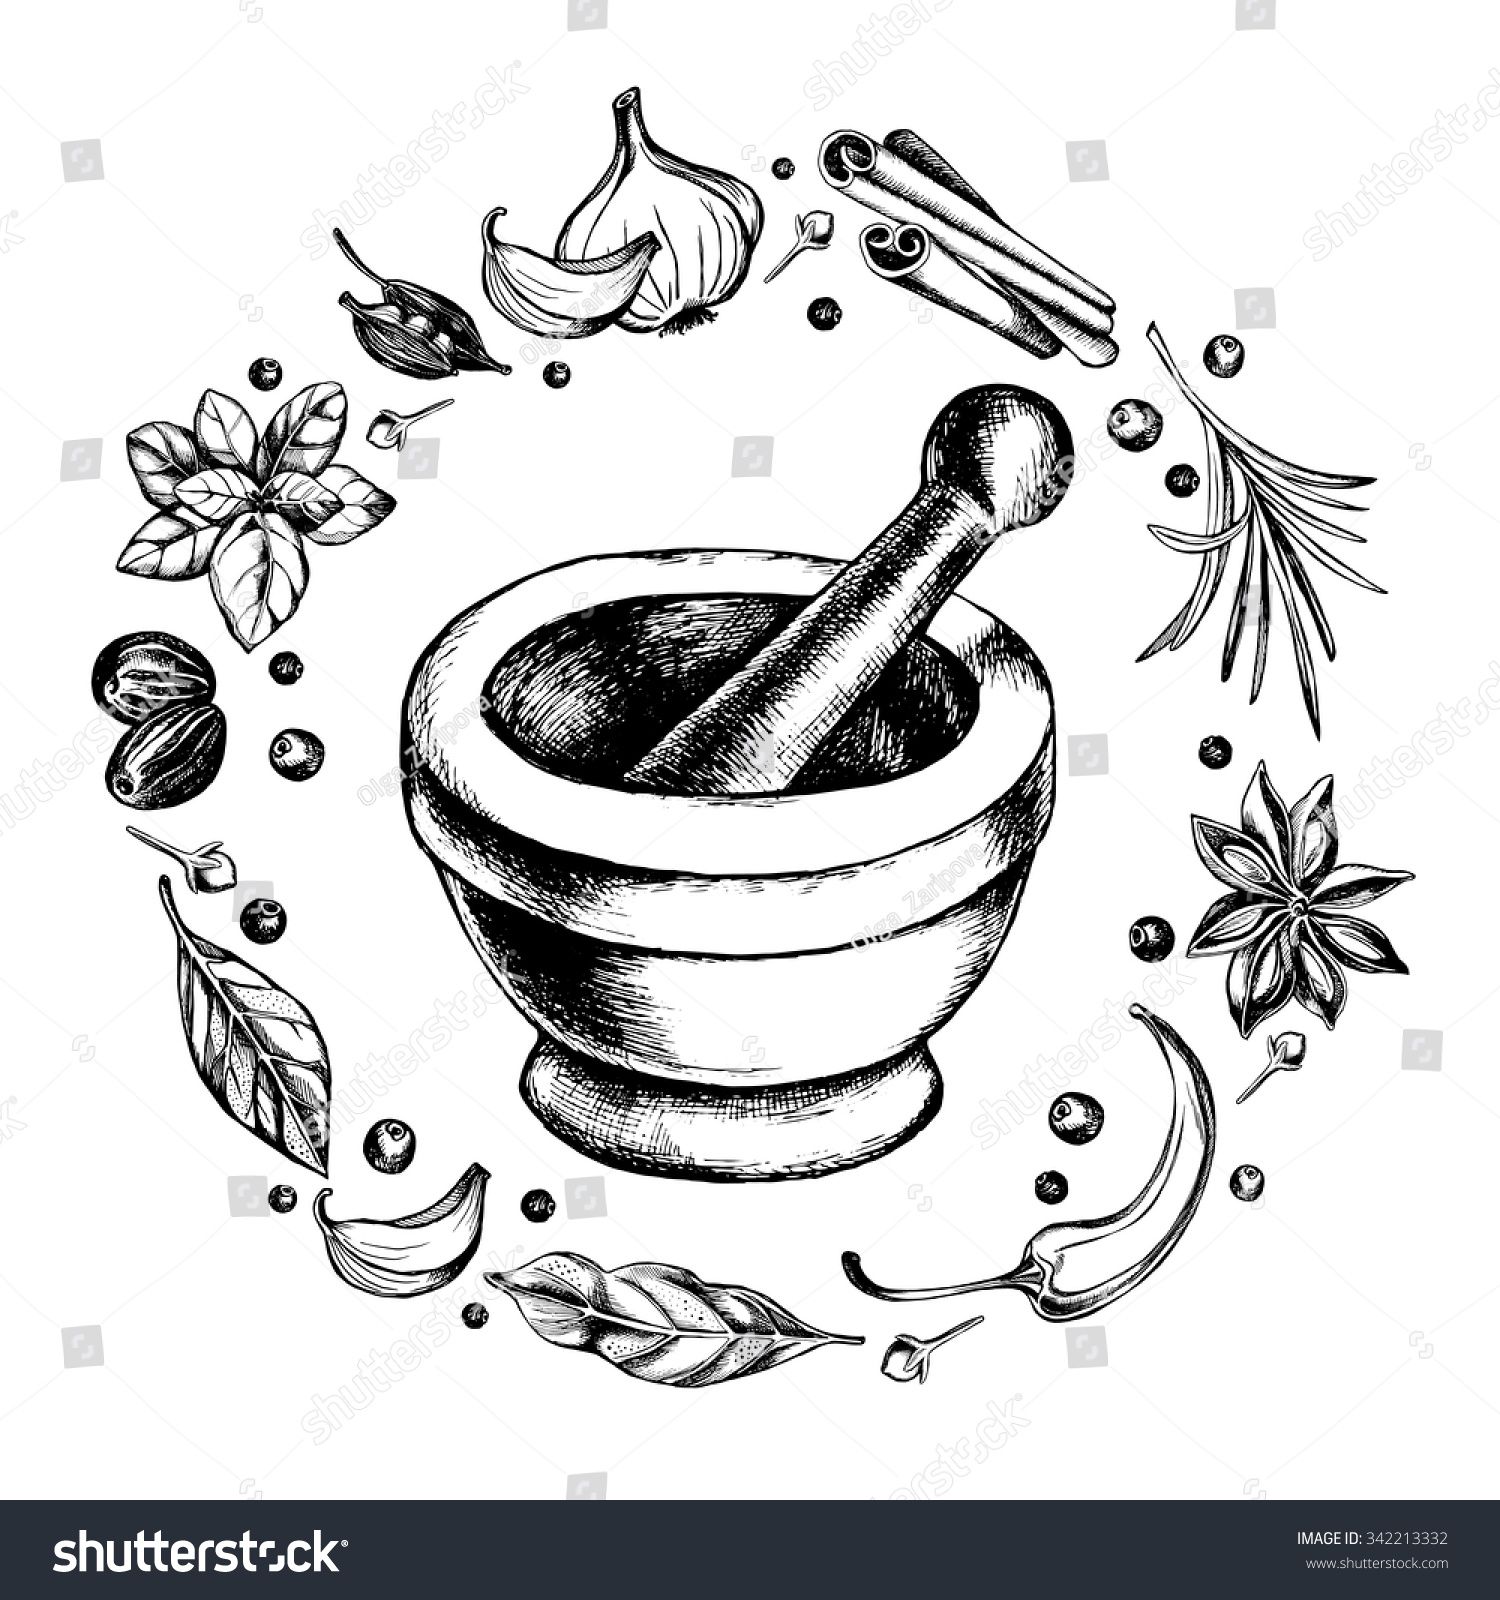 Mortar and pestle with herbs clipart black and white